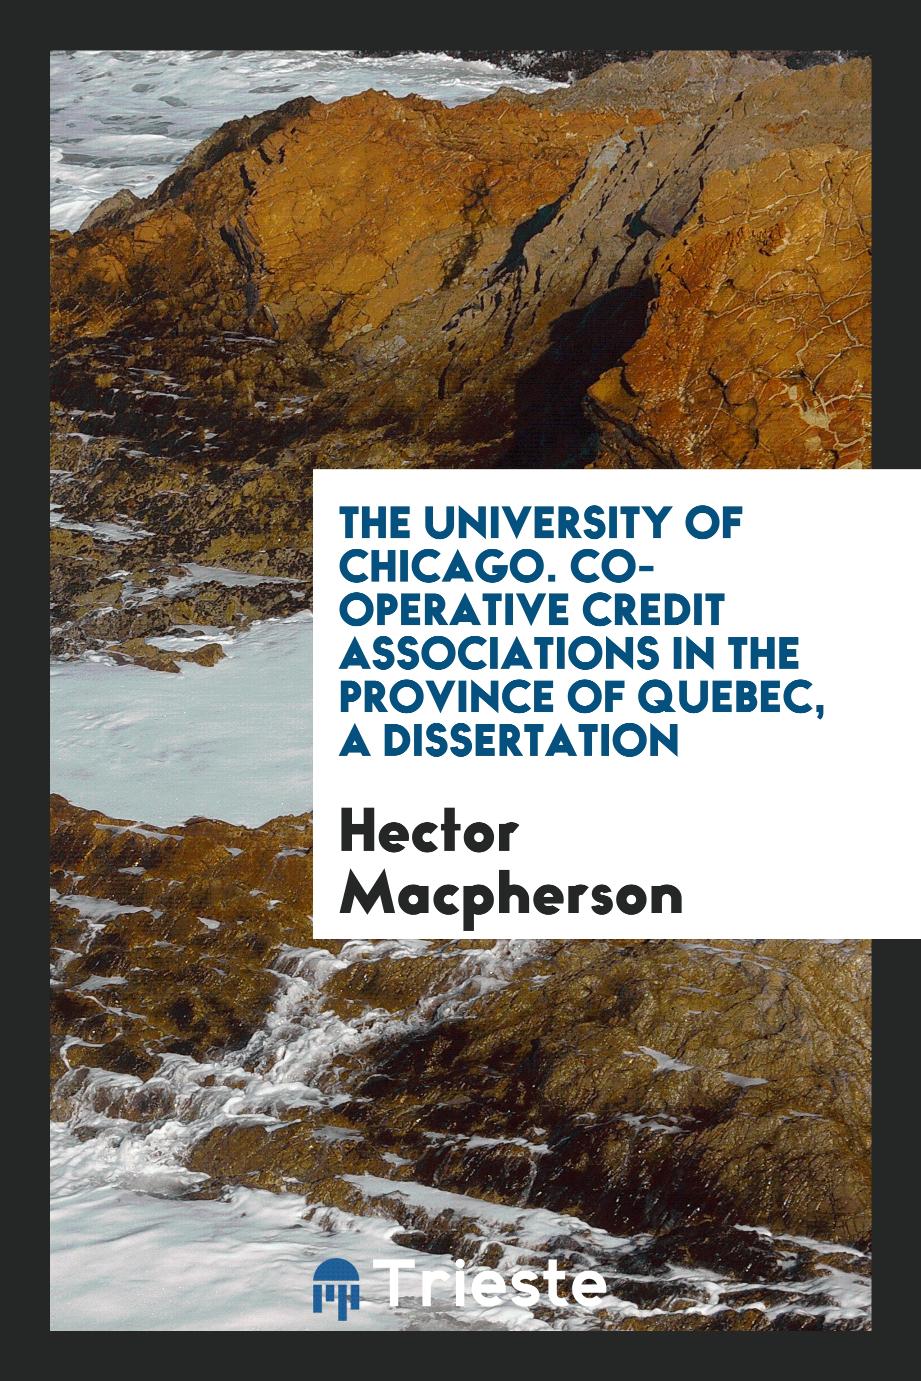 The University of Chicago. Co-Operative Credit Associations in the Province of Quebec, a Dissertation